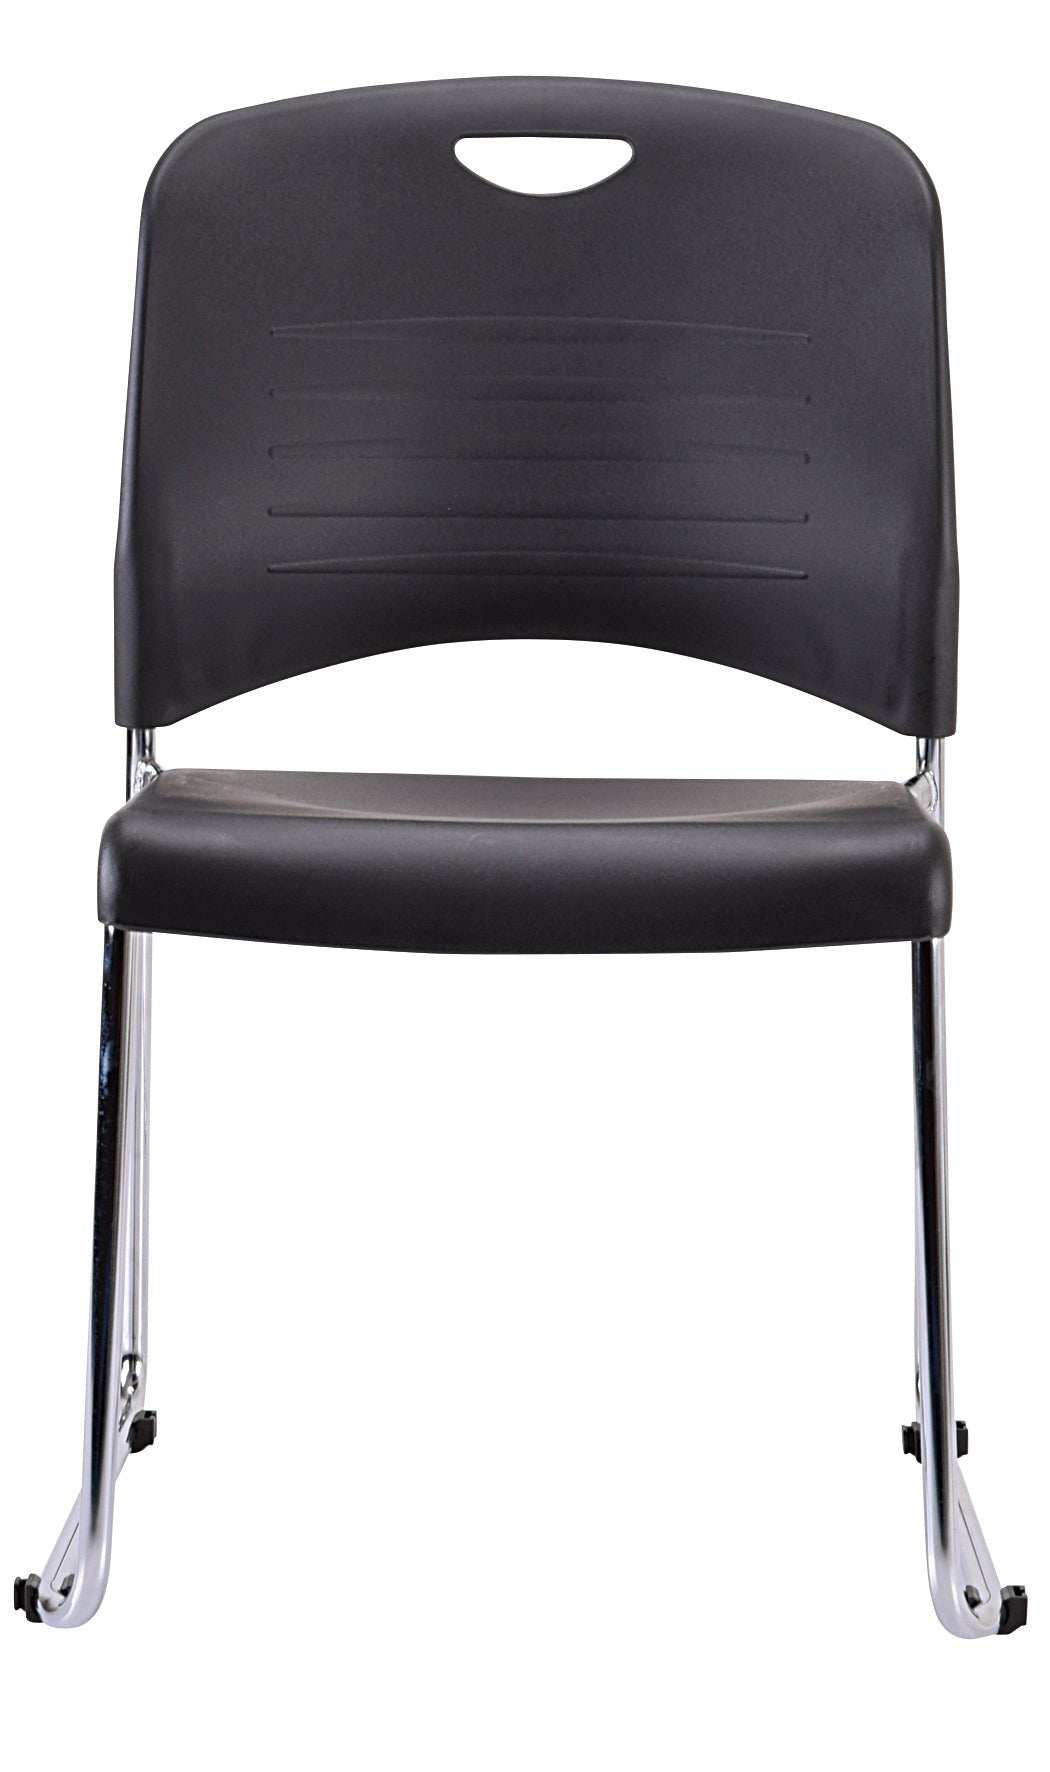 Set-of-Four-Black-and-Silver-Plastic-Office-Chair-Office-Chairs